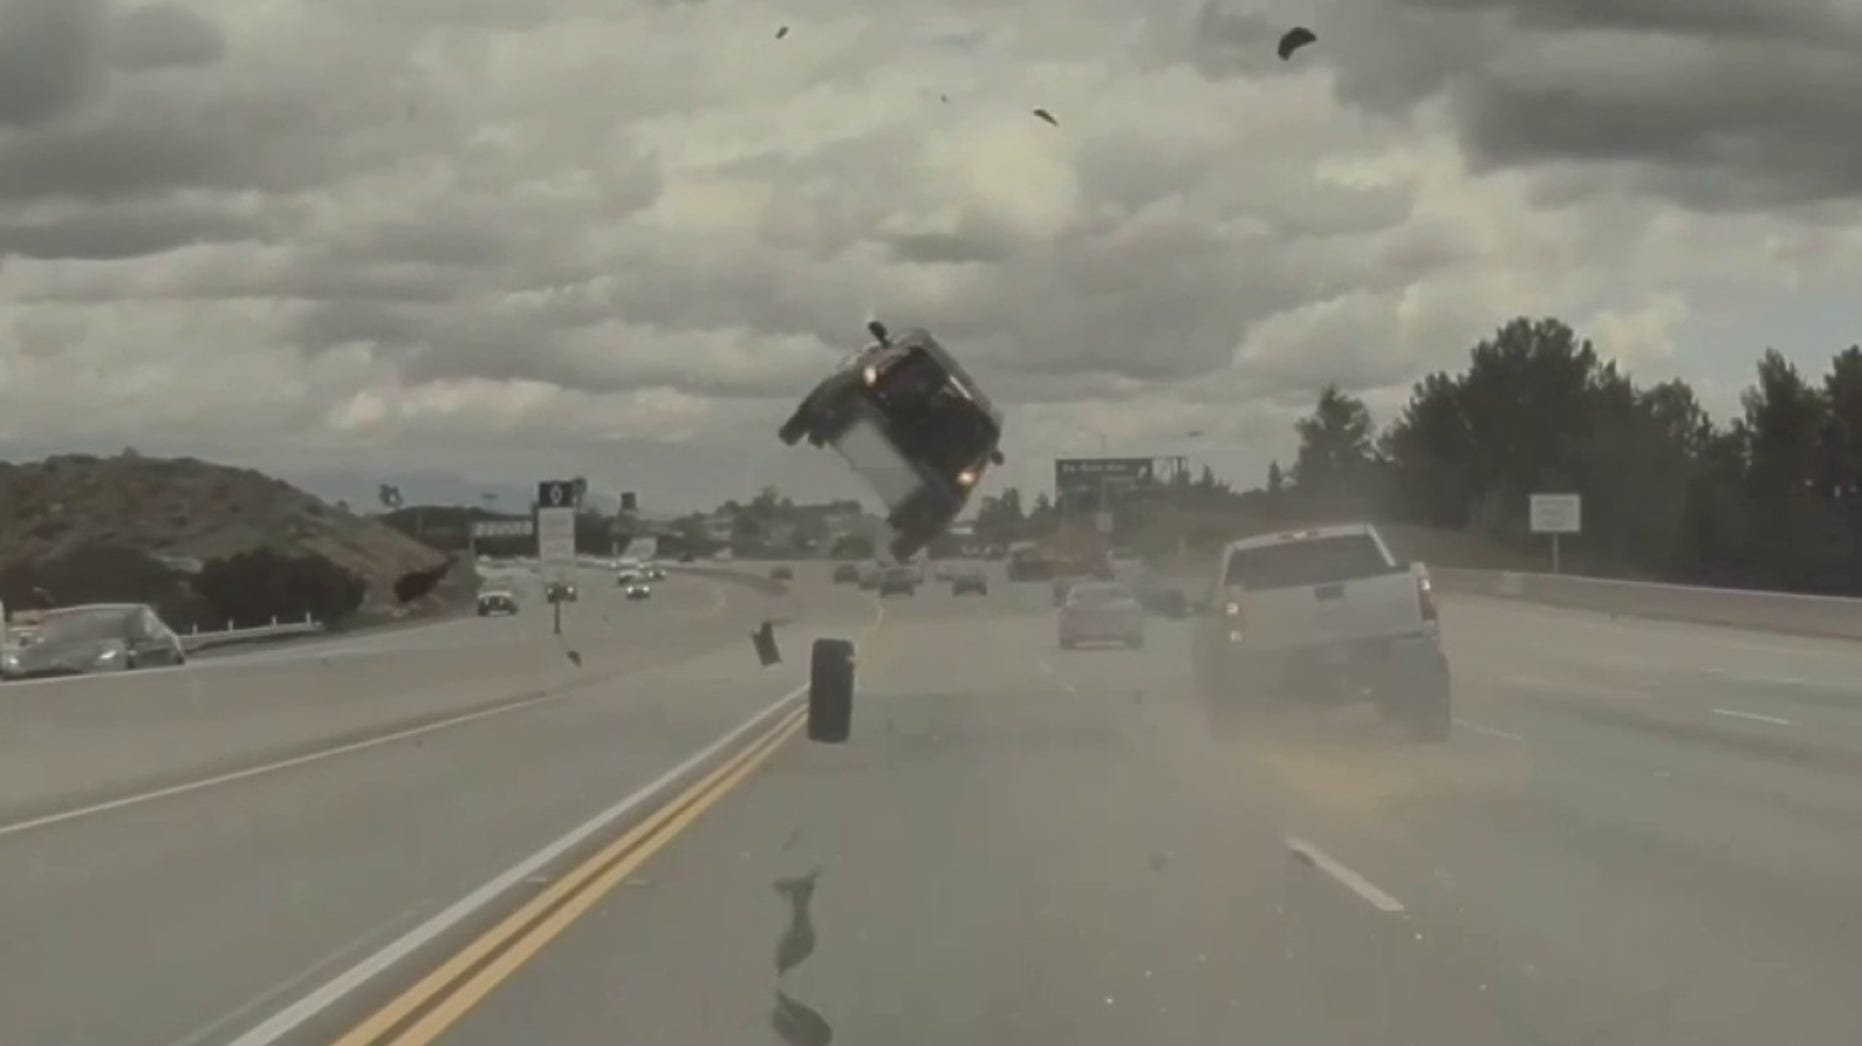 Car-flips-on-Los-Angeles-freeway-after-tire-pops-off-pickup-truck-video-shows.jpg